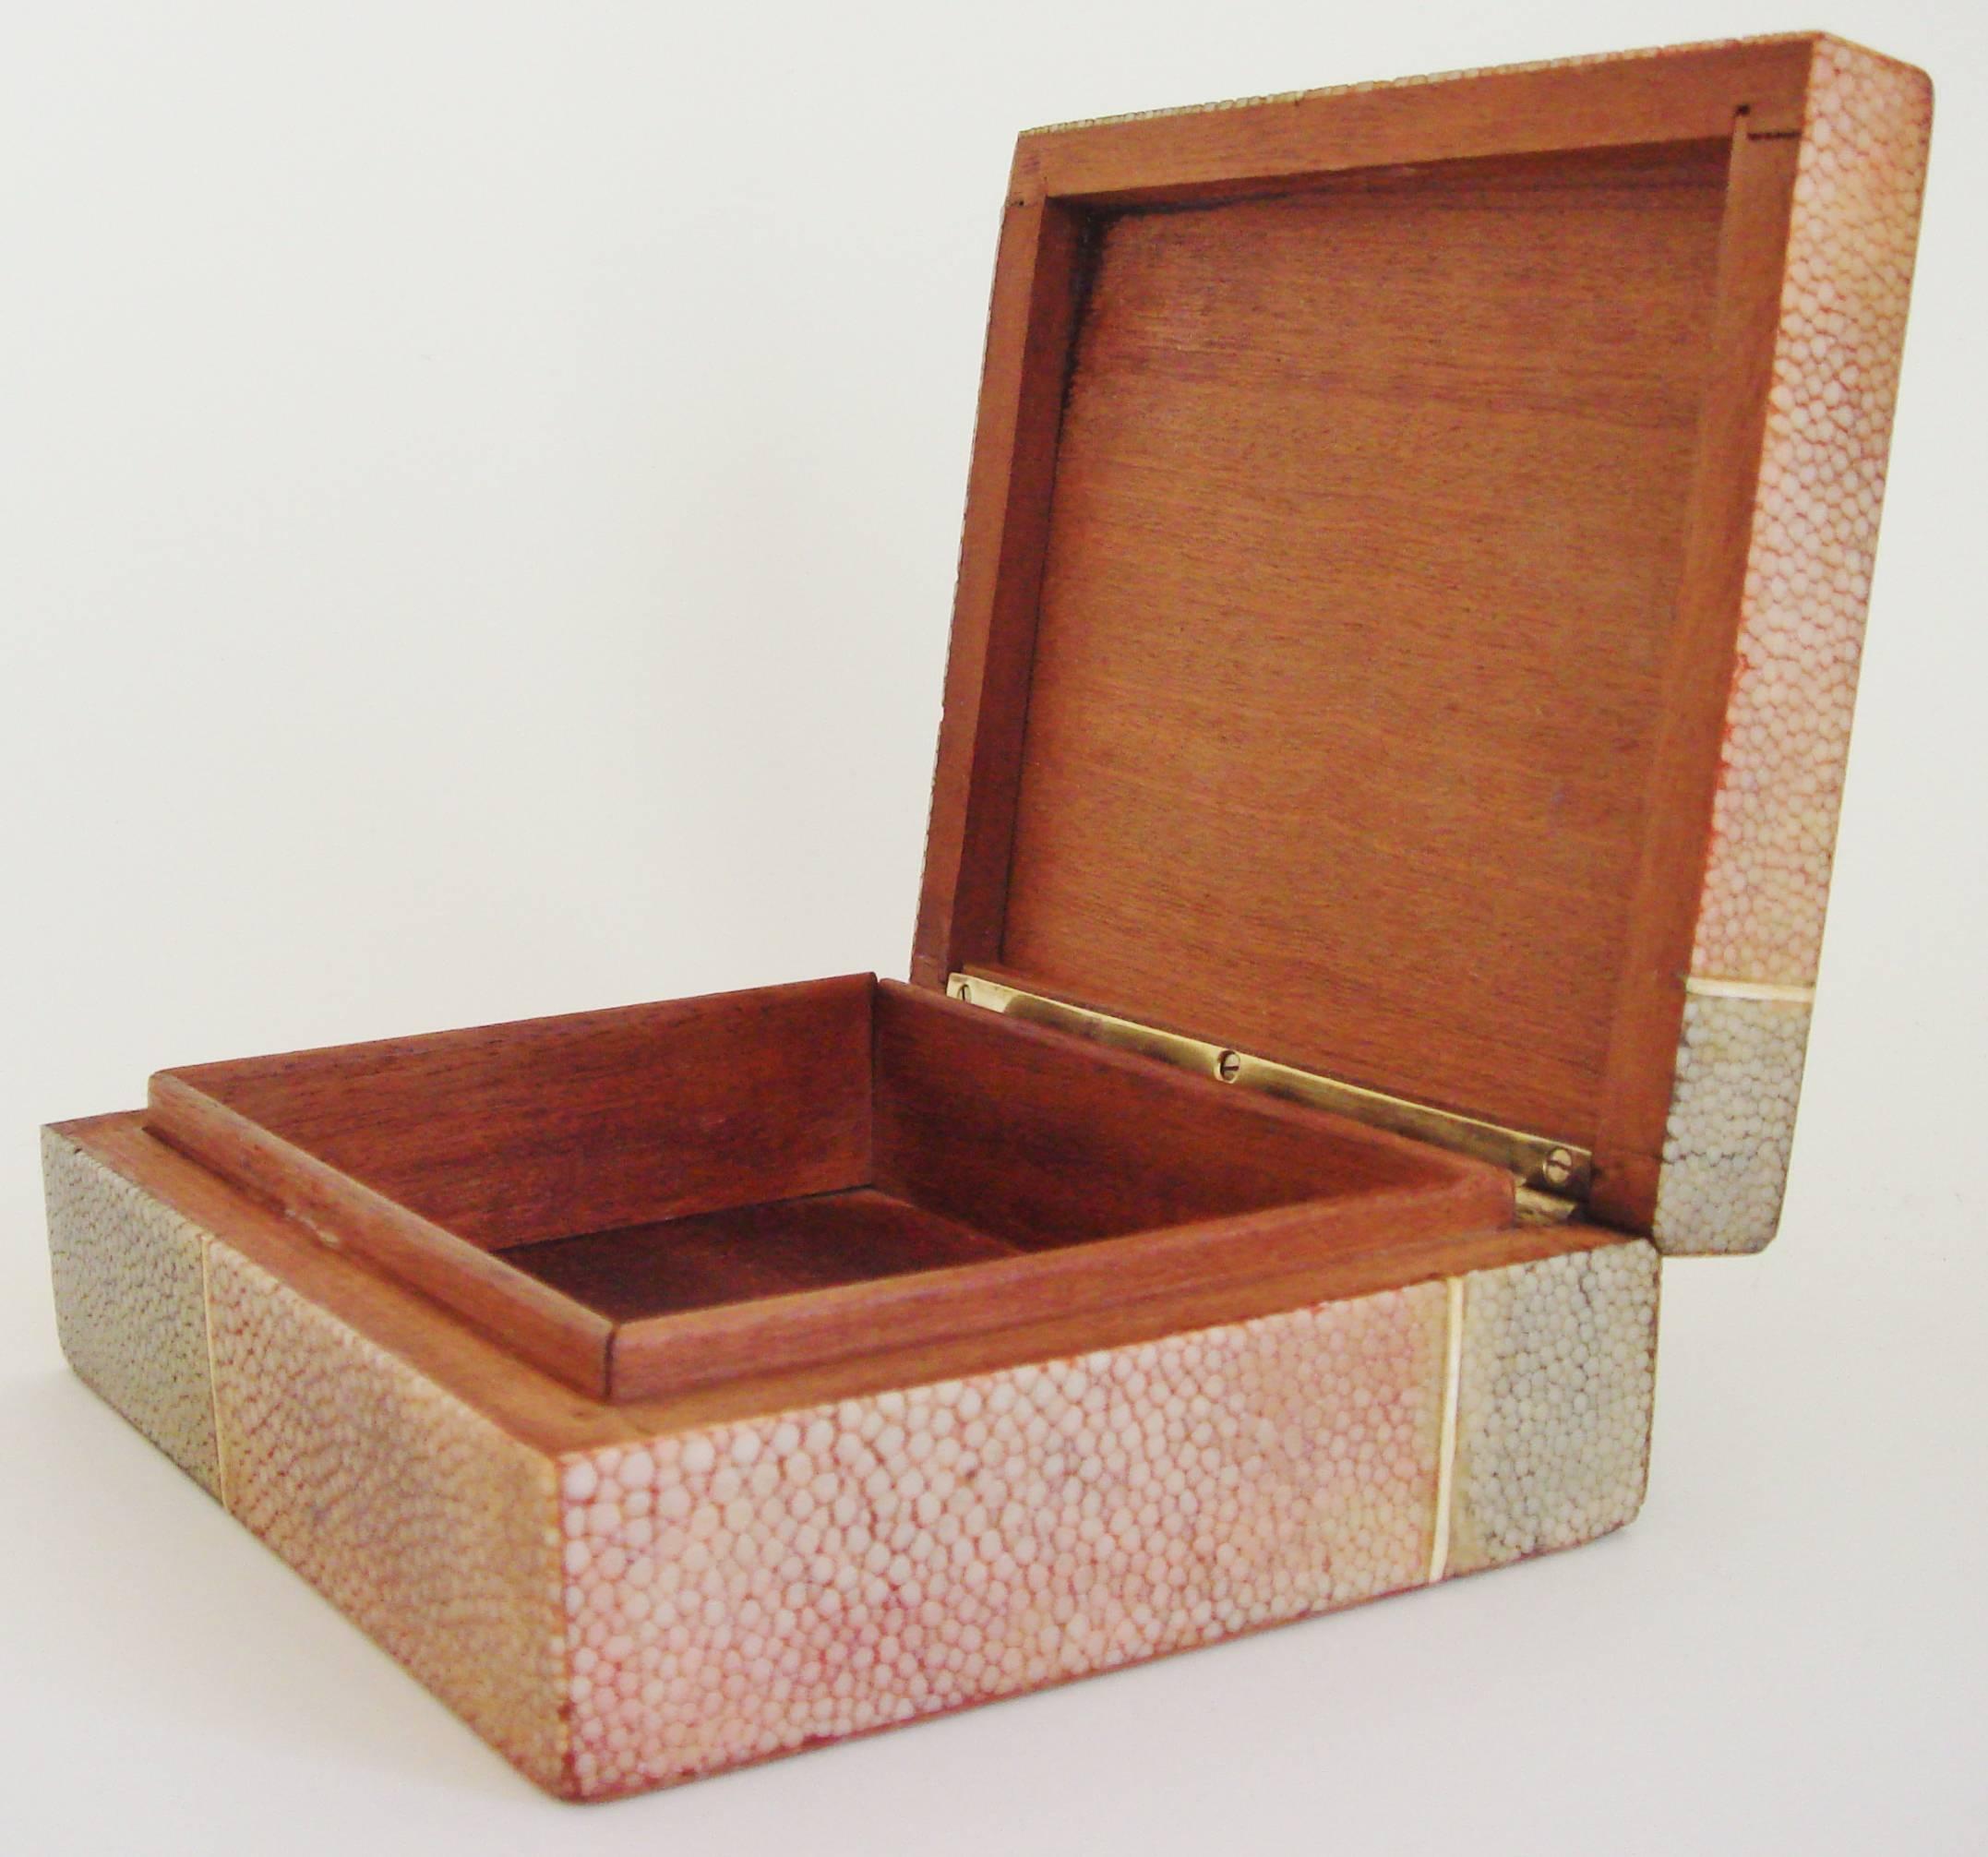 English Art Deco Geometric Two-Tone Shagreen with Bone Cigarette or Trinket Box In Good Condition For Sale In Port Hope, ON